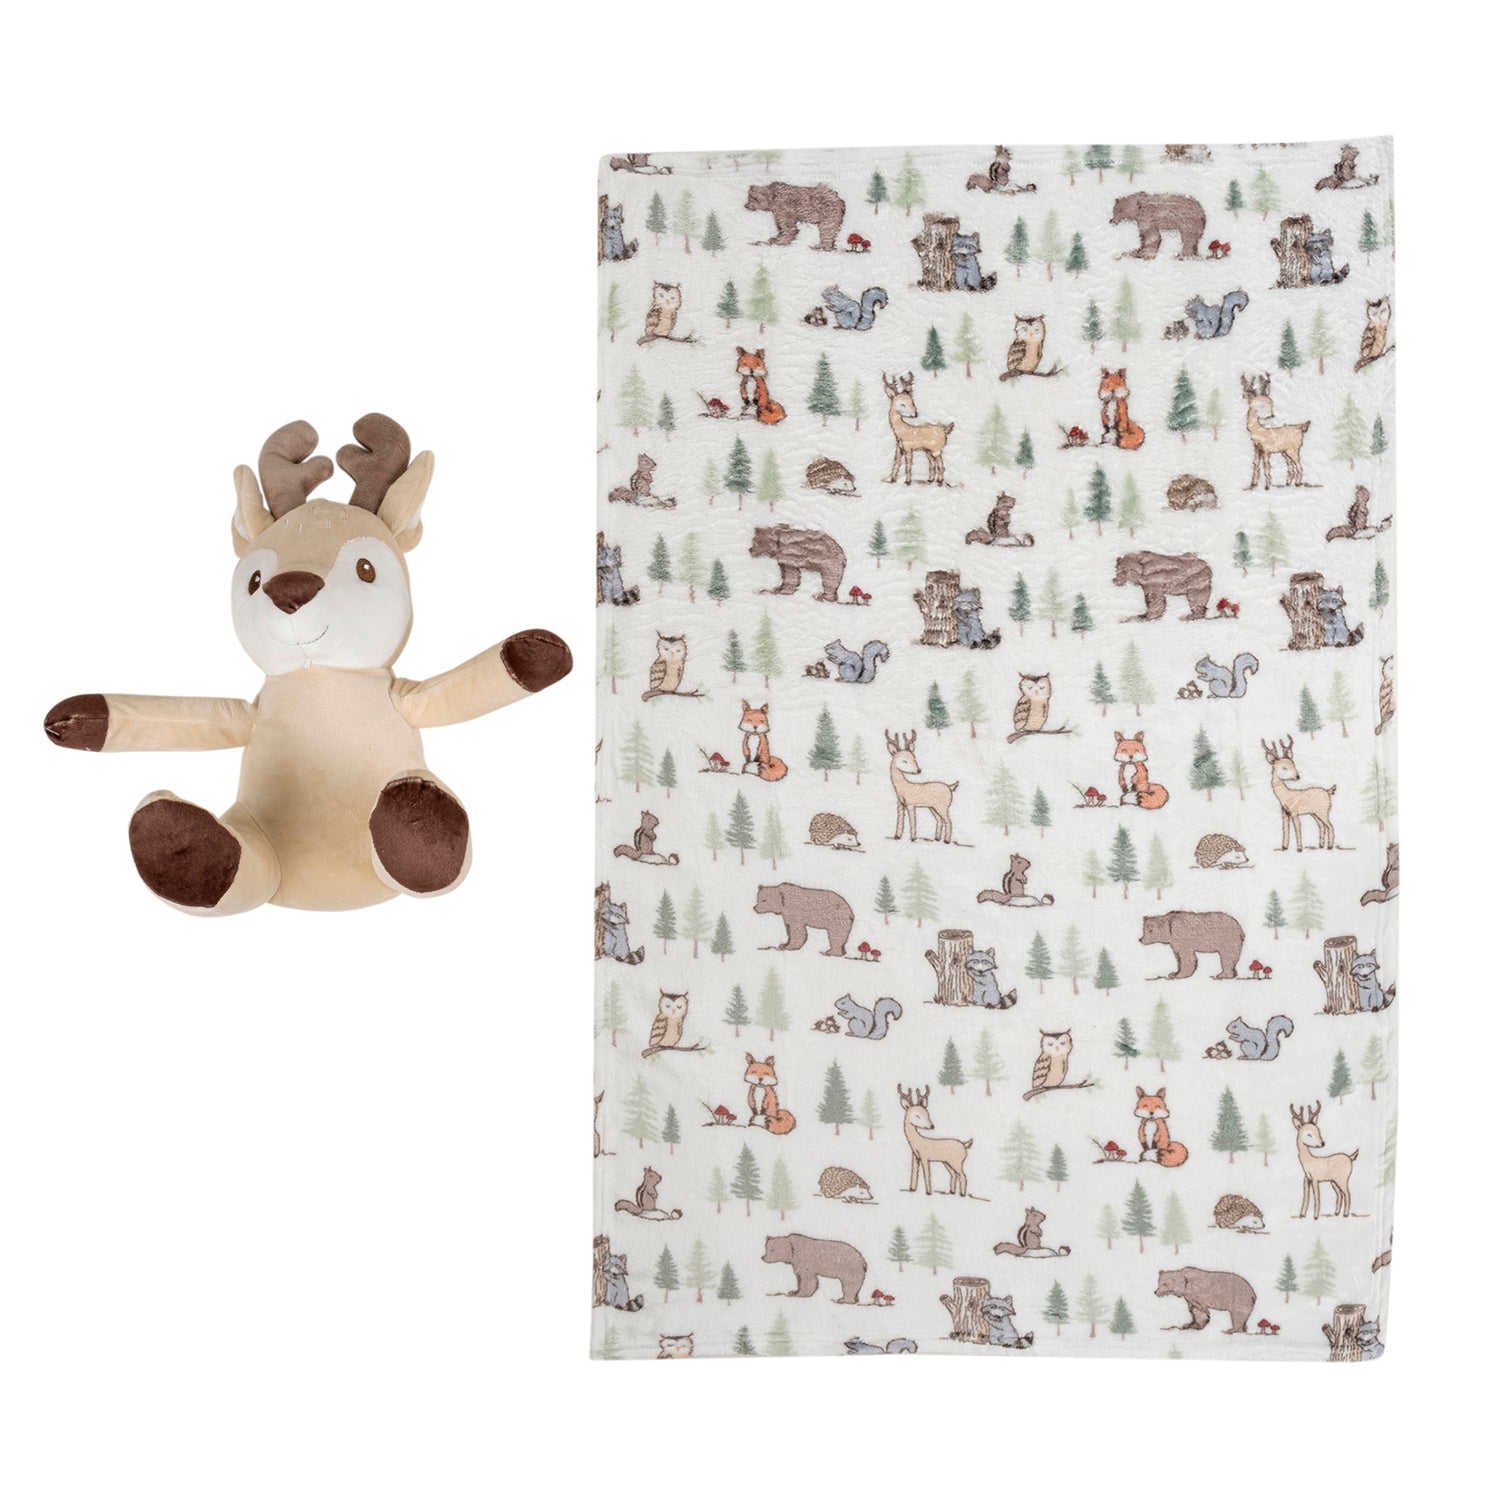 Baby Moo Reindeer Snuggle Buddy Soft Rattle and Plush Blanket Gift Toy Blanket - Beige